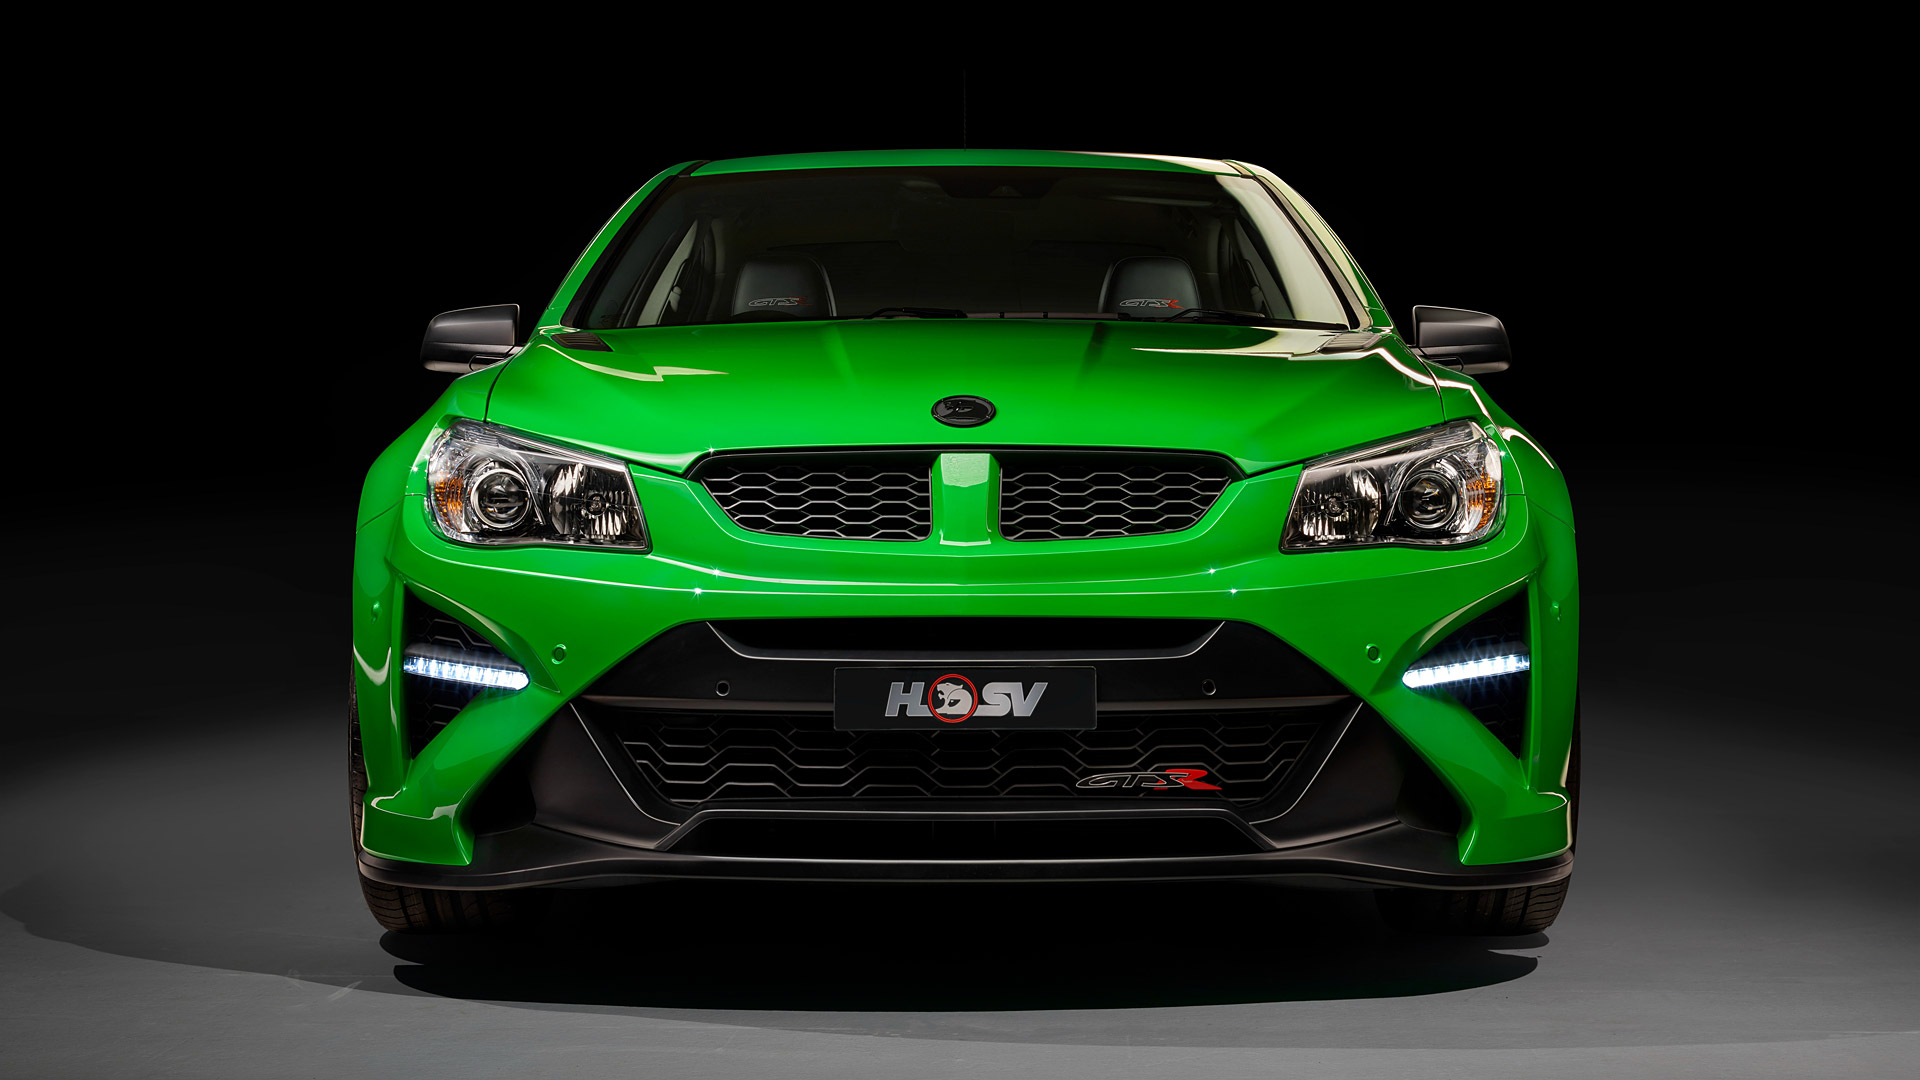 Holden Hsv Wa27 Wallpapers